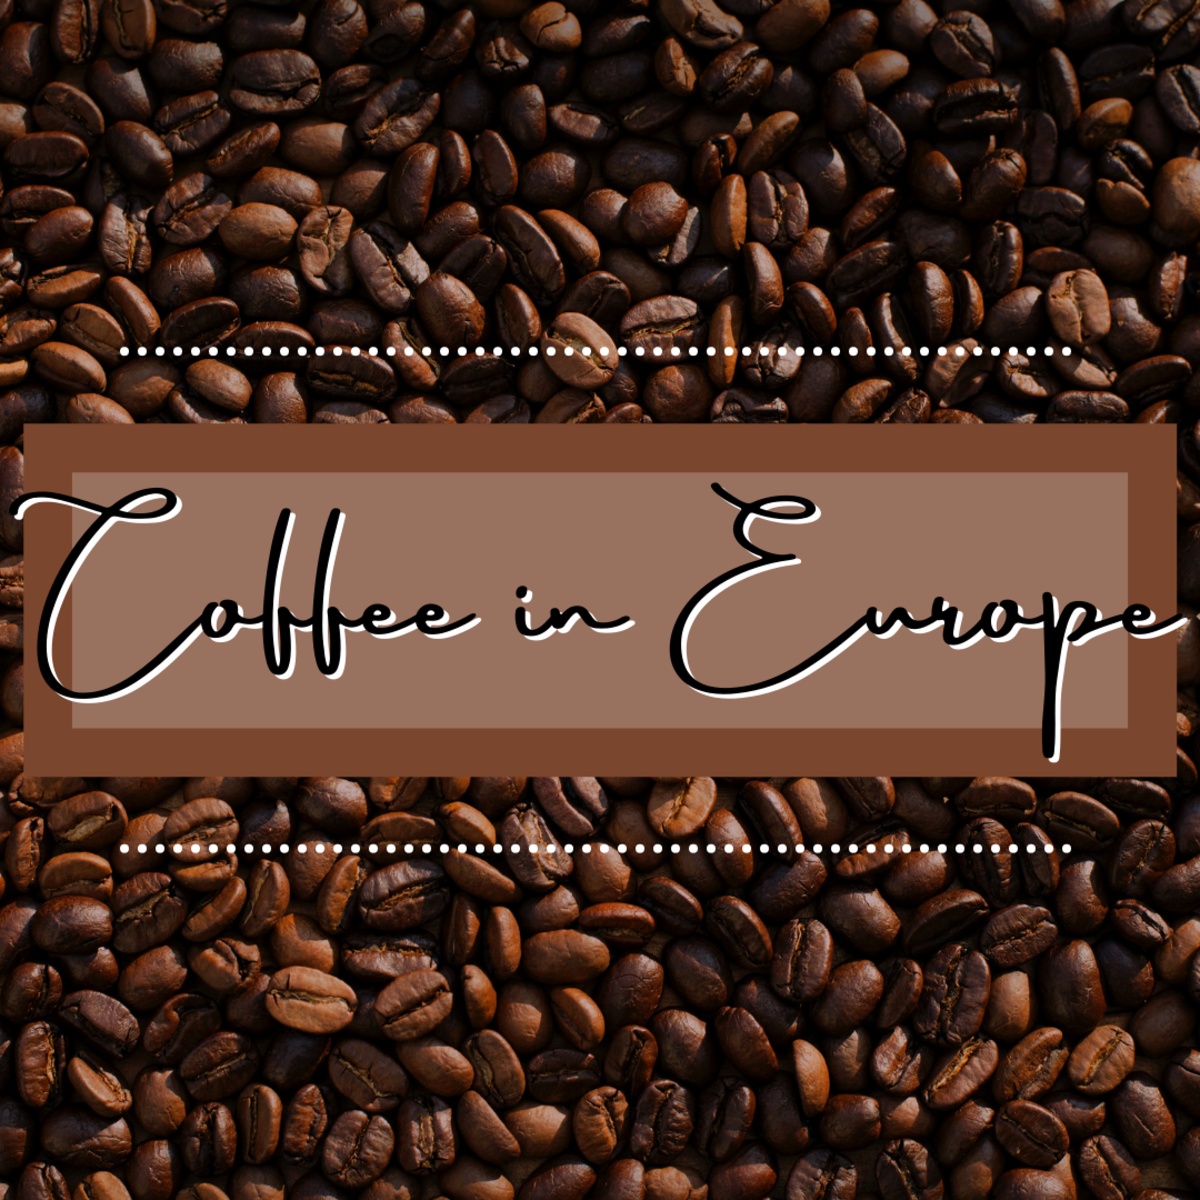 This article dives into the history of Viennese coffee, which is an early coffee in Europe and might just be the father of modern coffee drinks that employ milk.